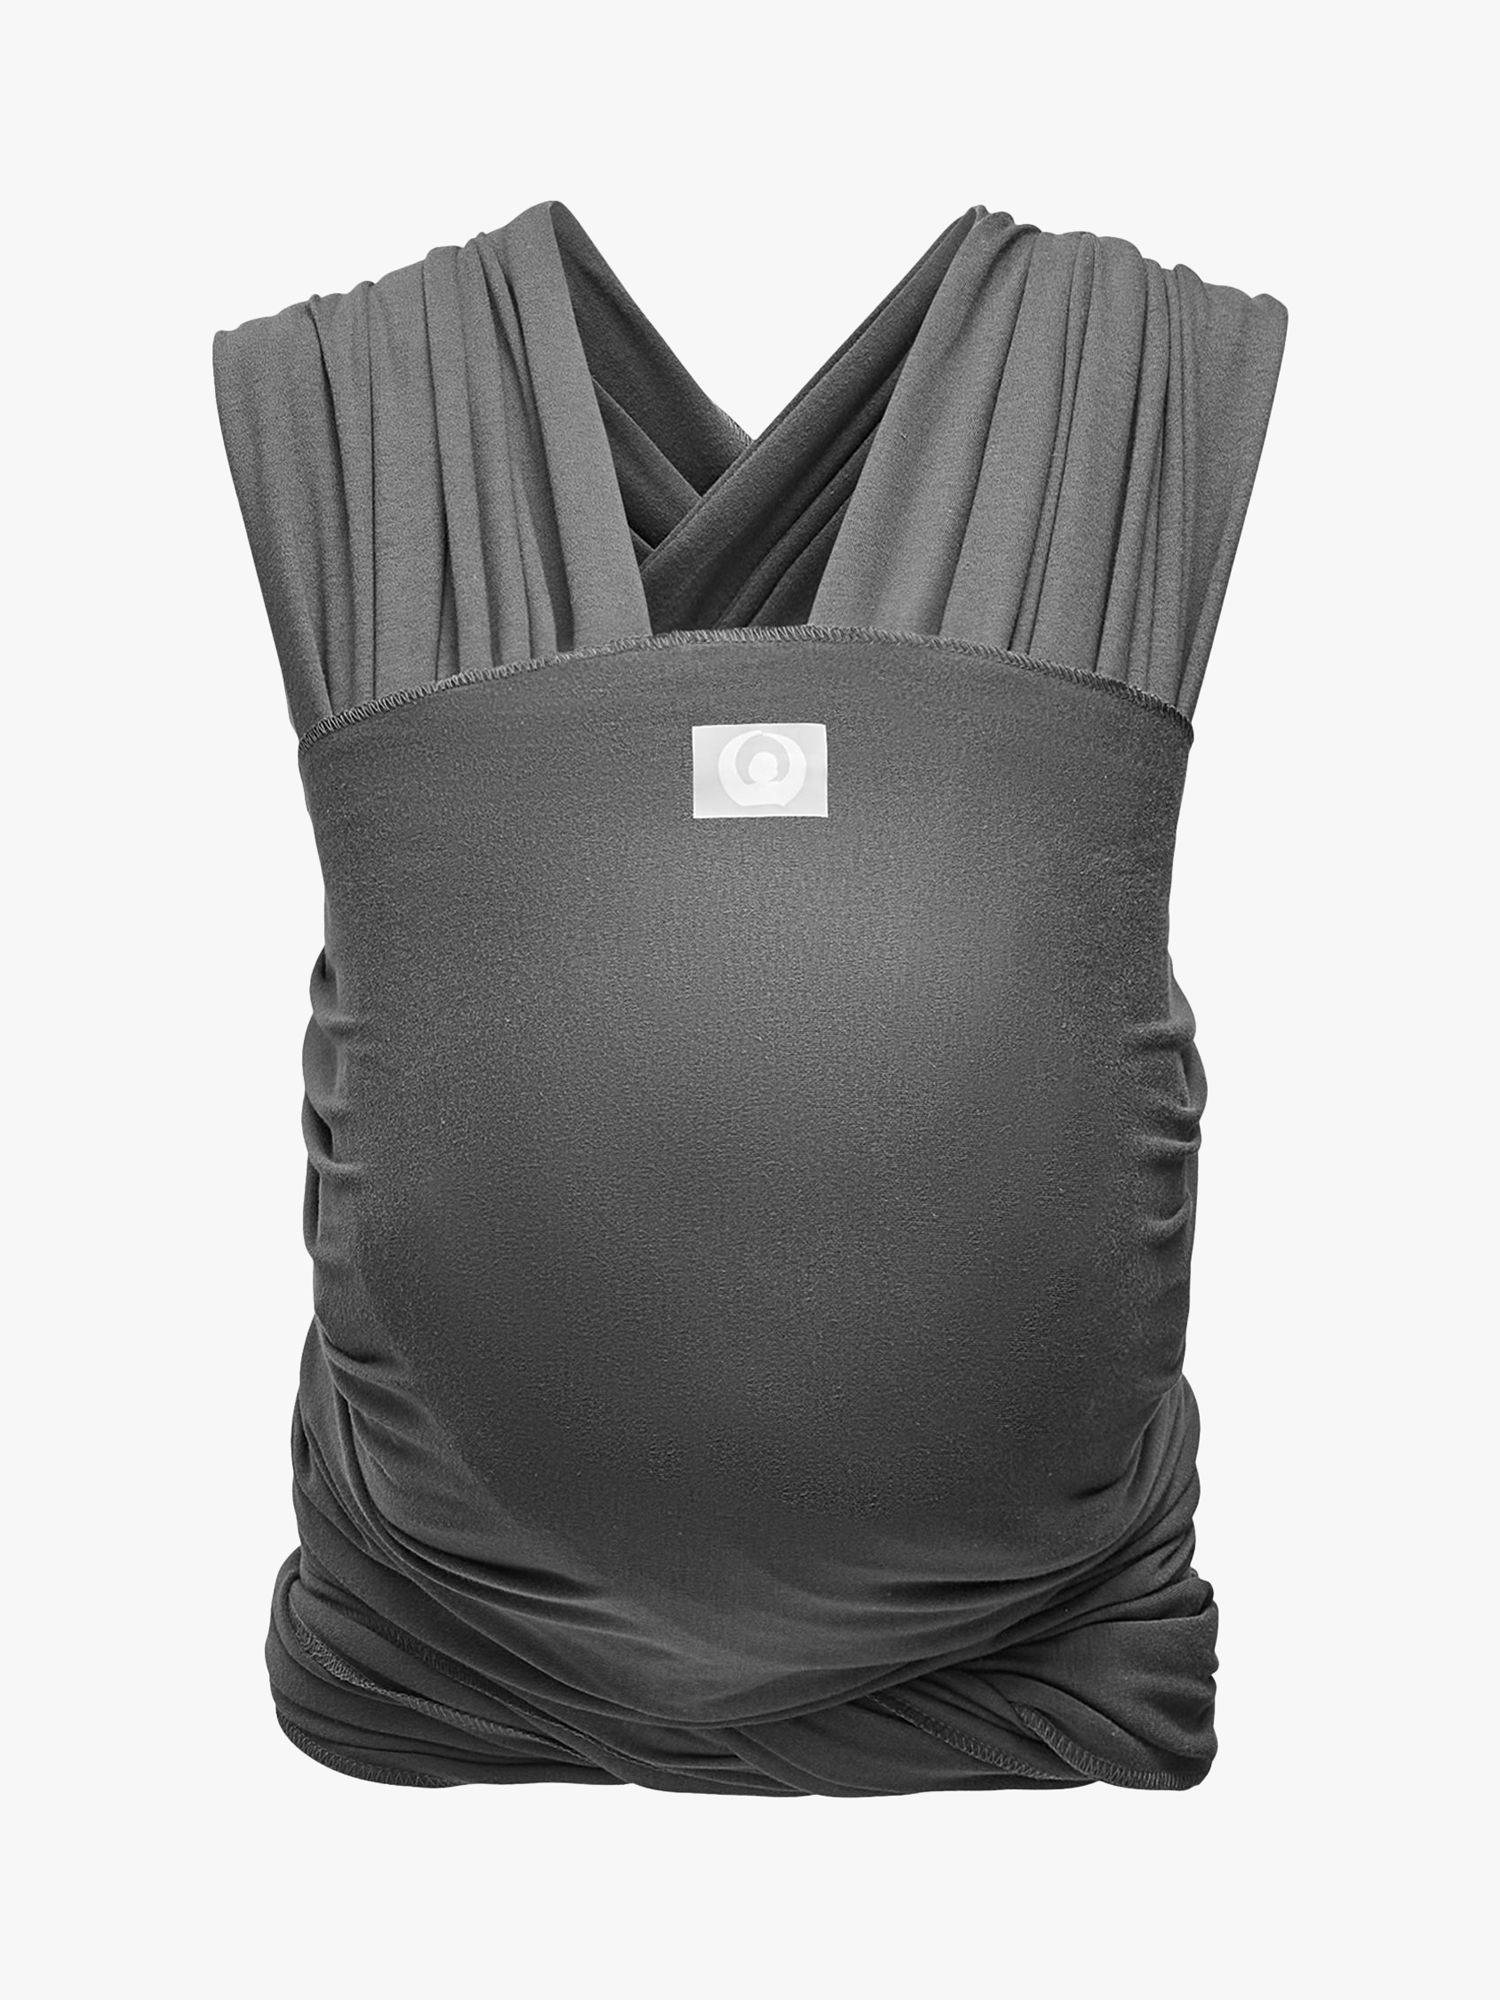 Gaia Baby Organic Cotton Stretchy Wrap Baby Carrier, Graphite